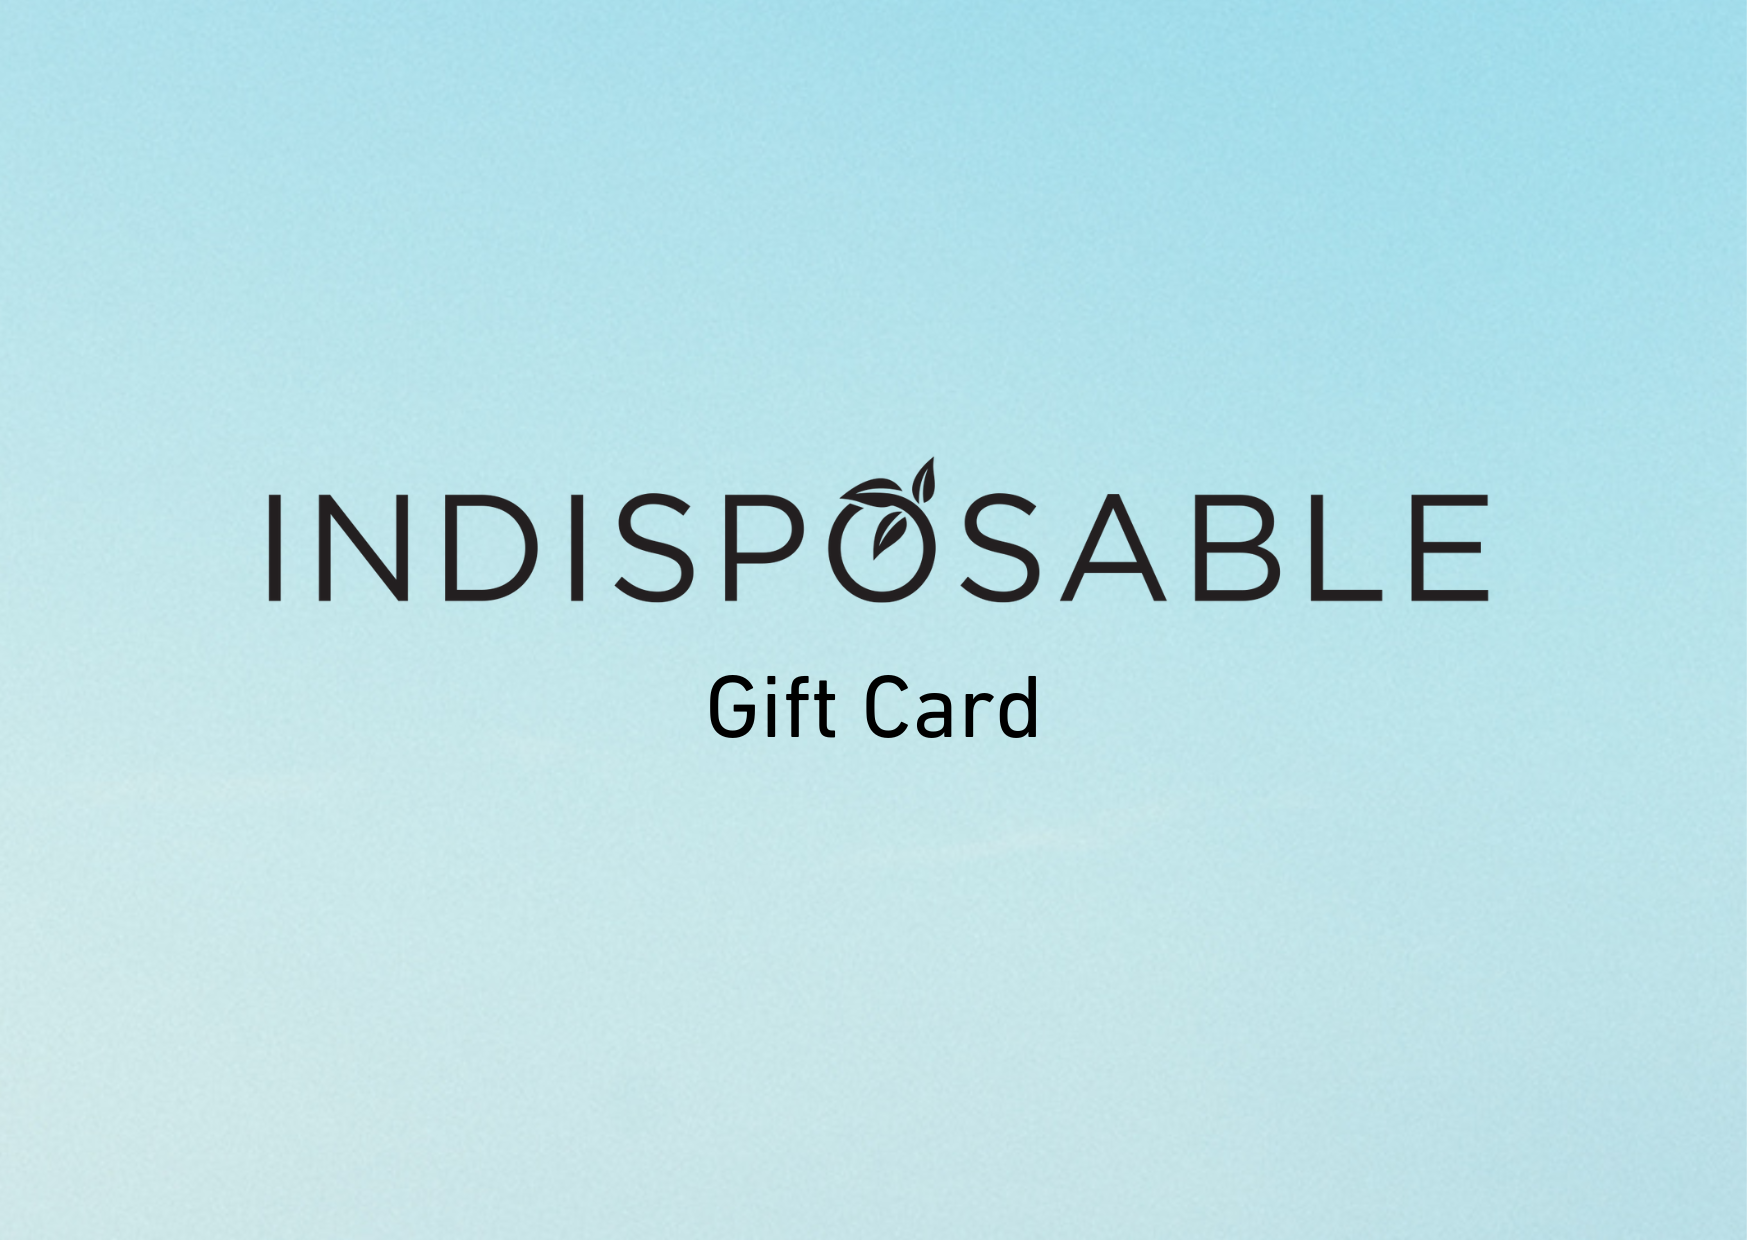 Indisposable - Gift Voucher